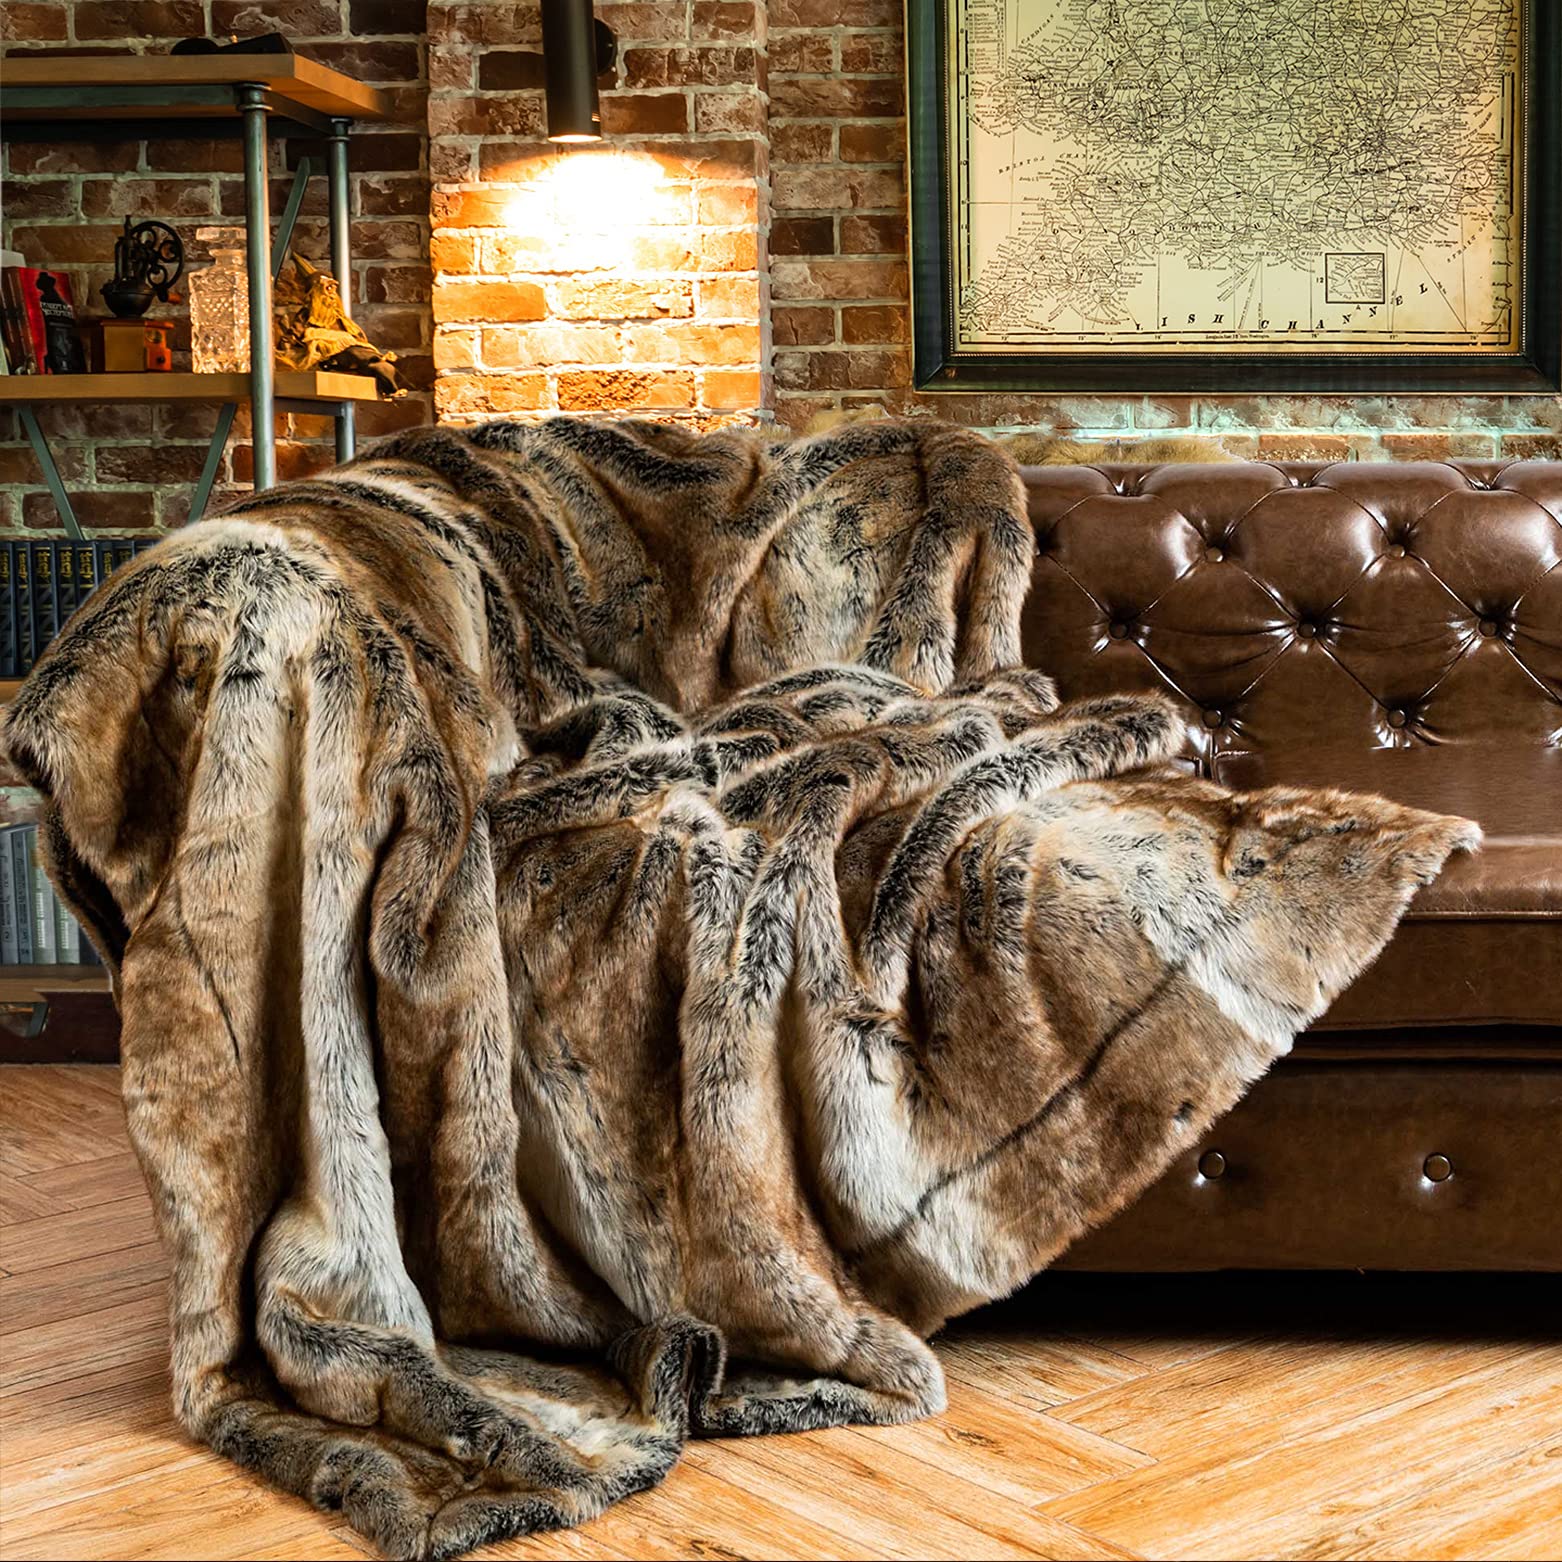 BATTILO HOME Faux Fur Throw Blankets Brown 125x150cm Luxury Decorative Fuzzy Warm Cozy Fake Fur Blanket for Bed, Sofa, Couch